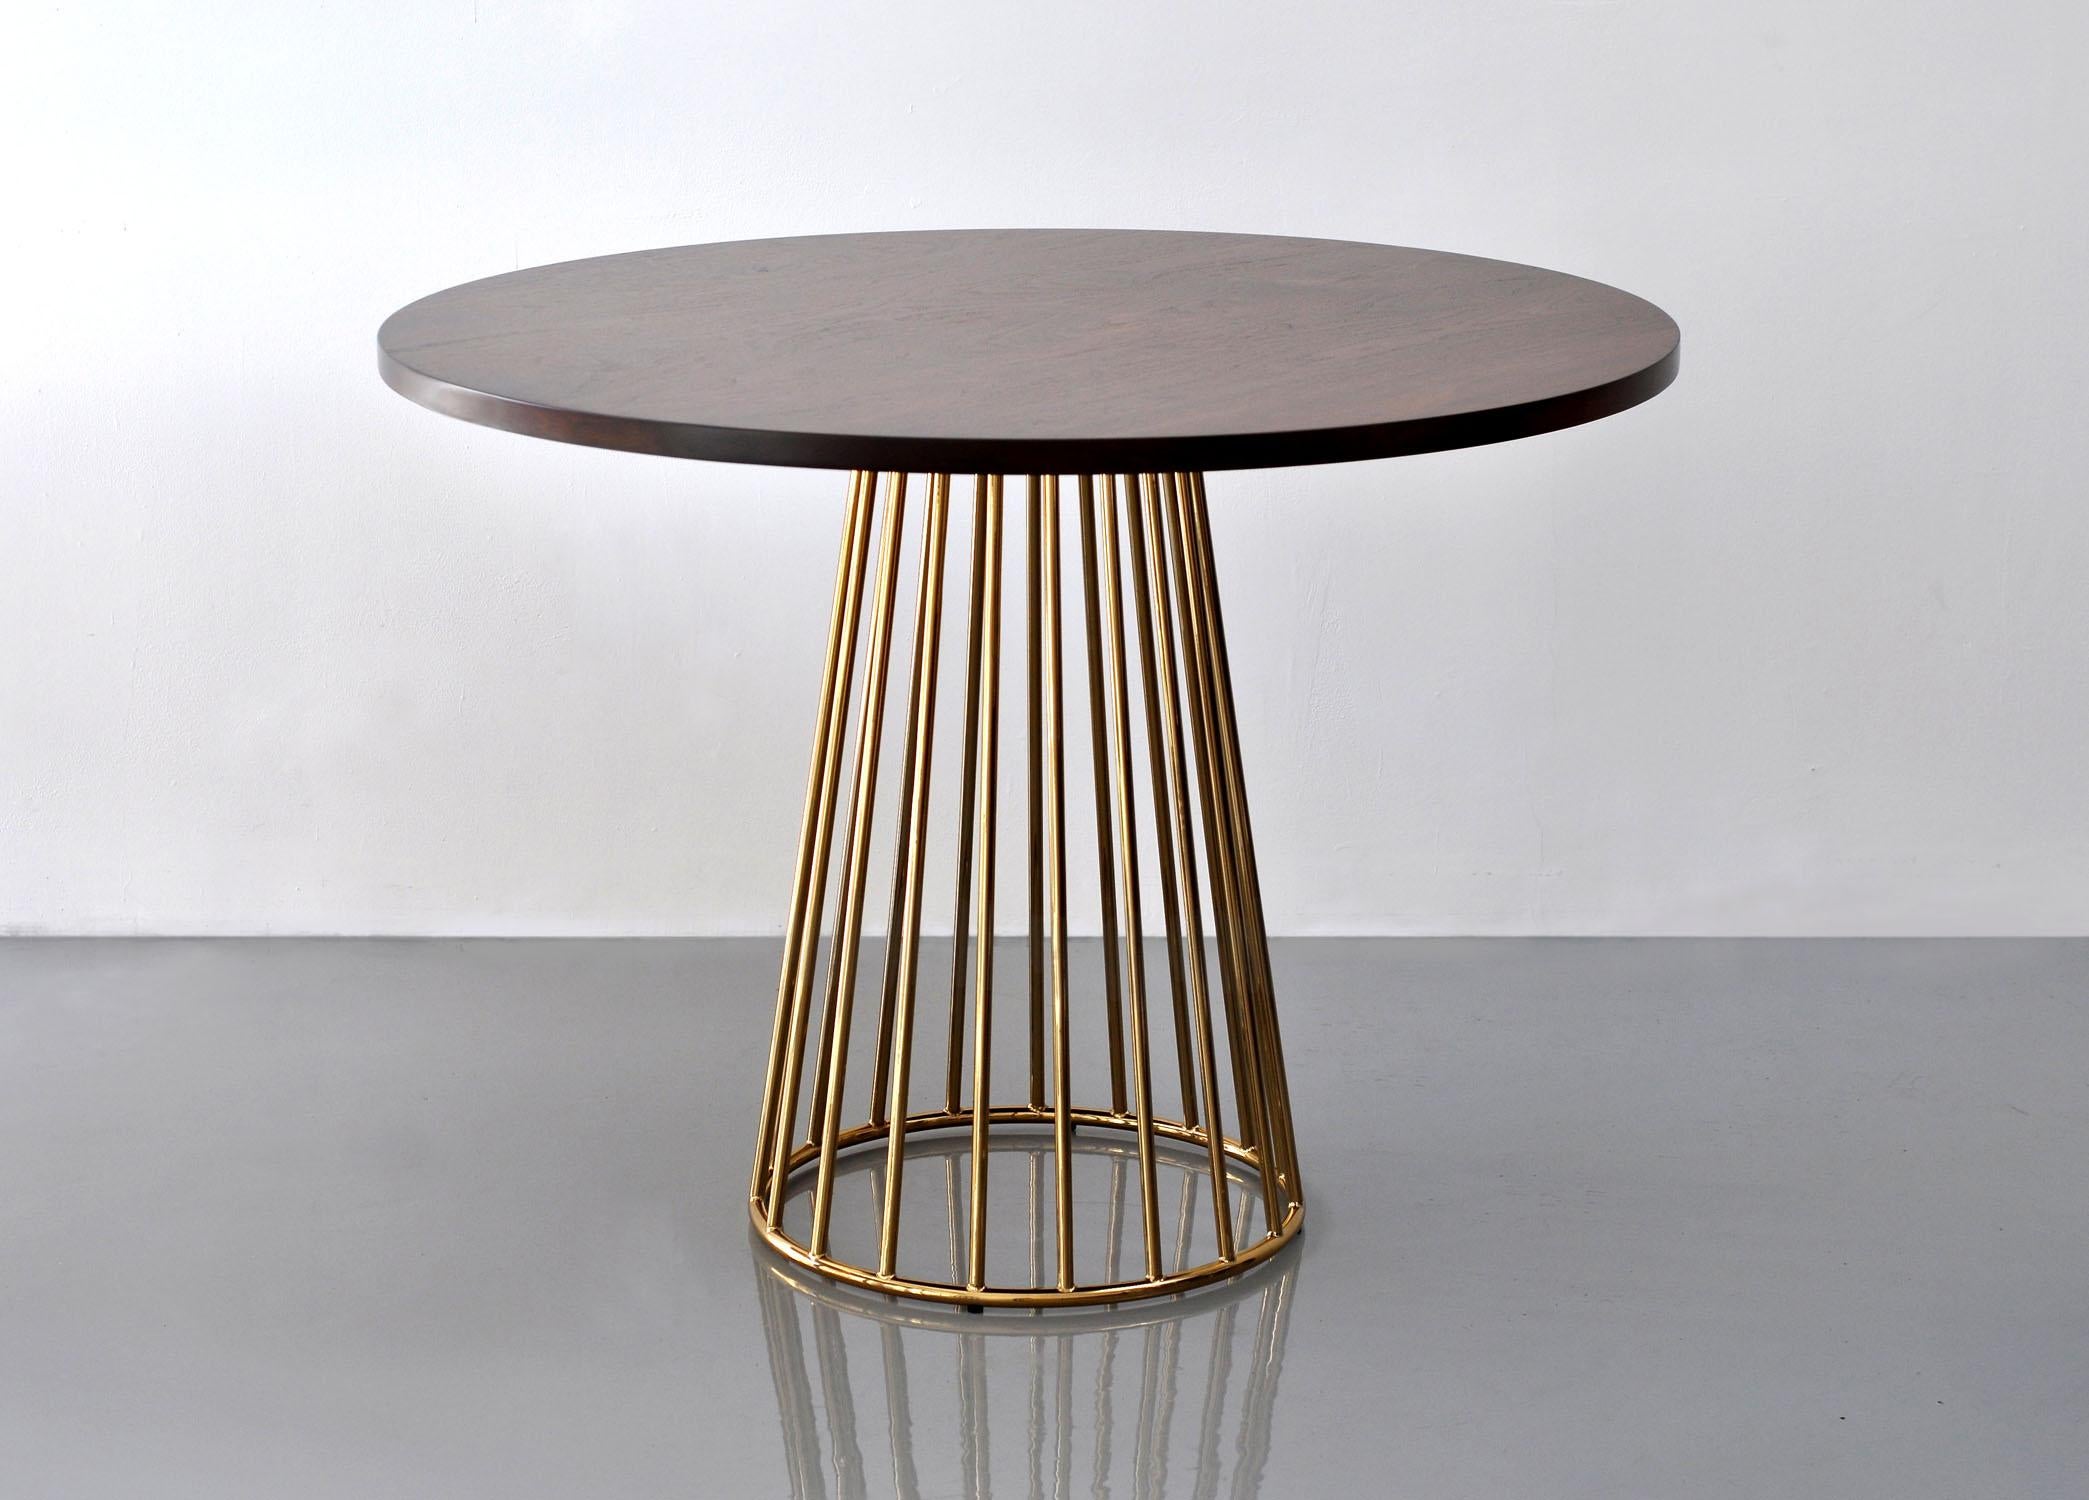 Wired Cafe Table by Phase Design, Flat Black In New Condition For Sale In North Hollywood, CA